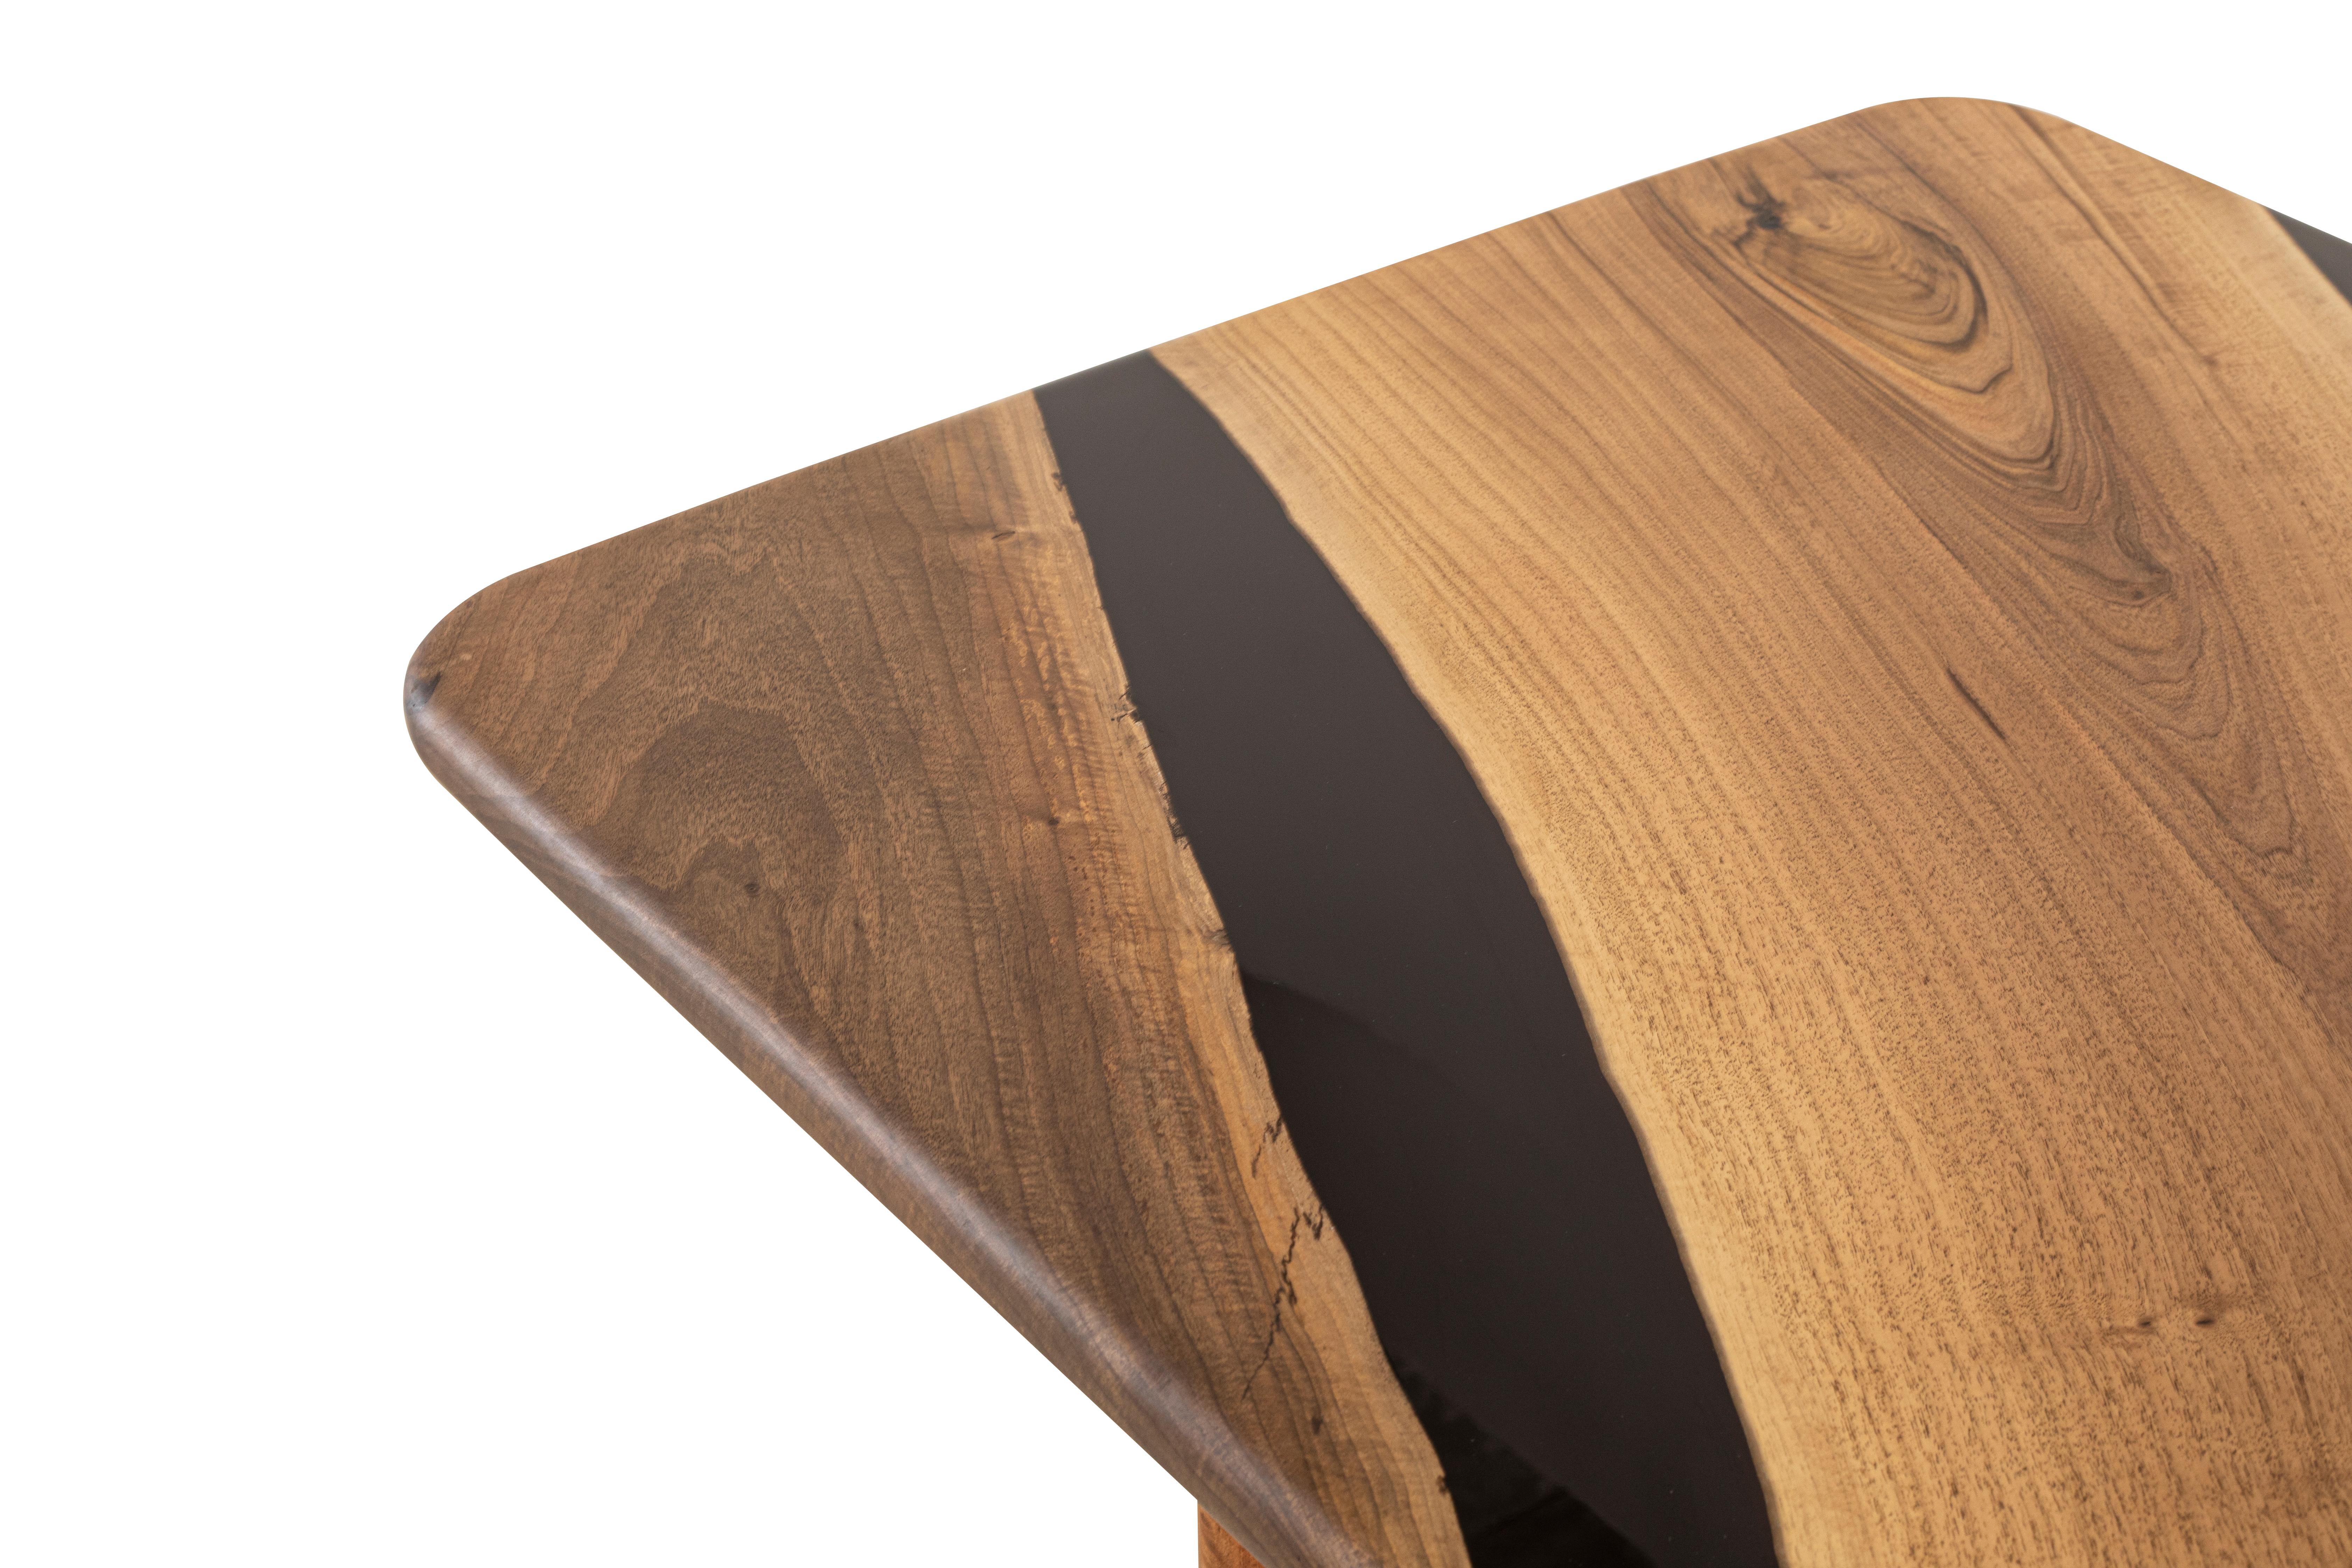 Black Walnut Epoxy Resin Dining Table

This table is made of walnut wood. We combined walnut wood with black epoxy resin colour. 

Custom sizes, colours and finishes are available!